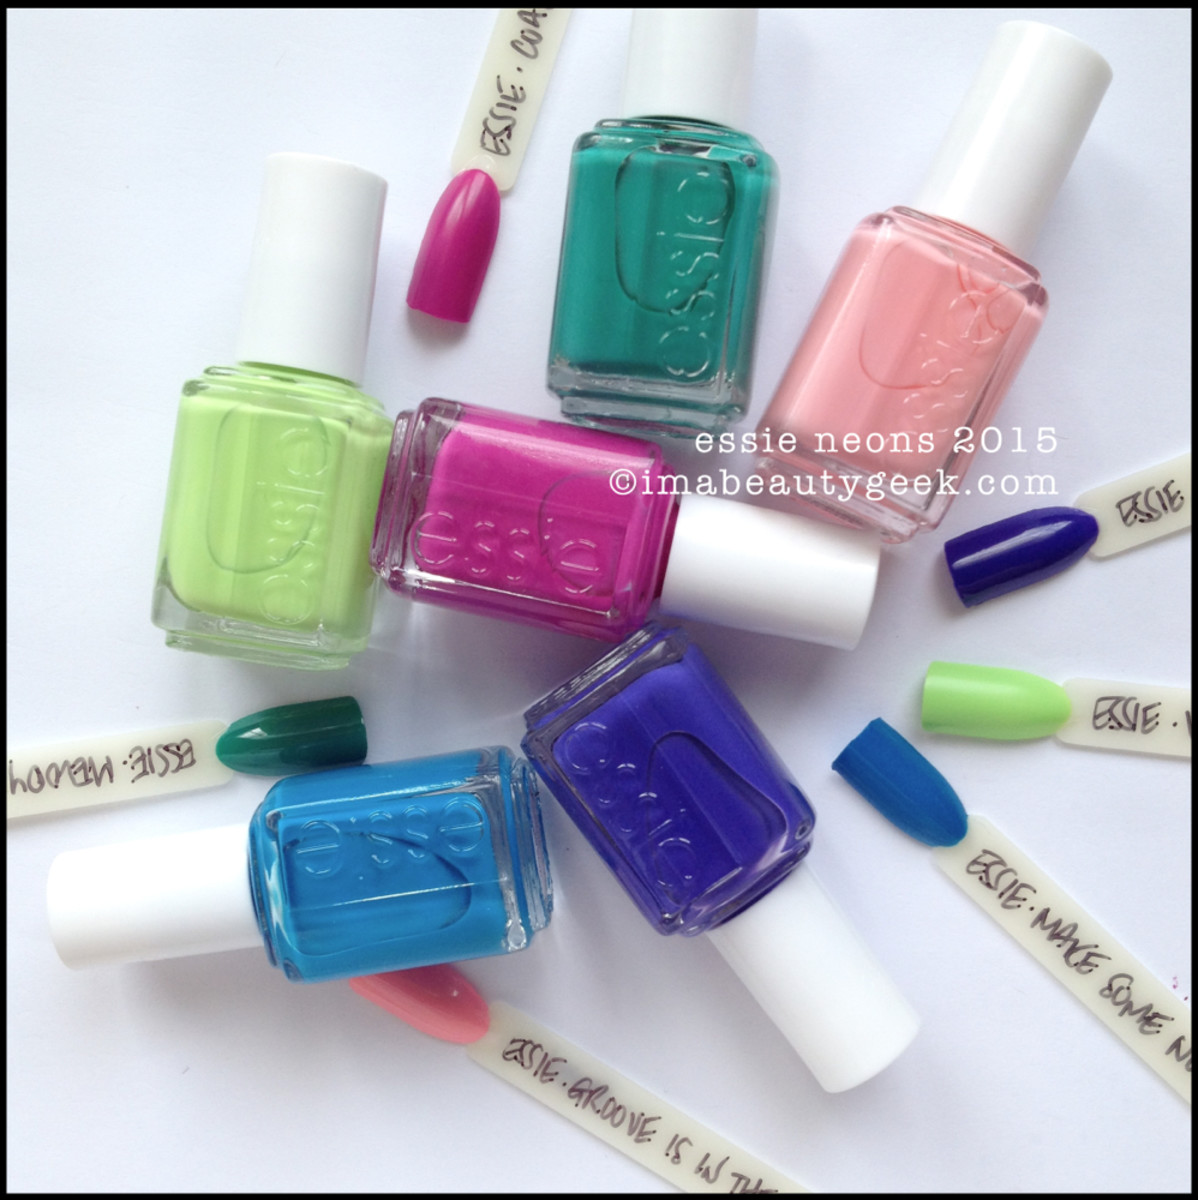 Essie Neons 2015 Collection Swatches from the Manigeek